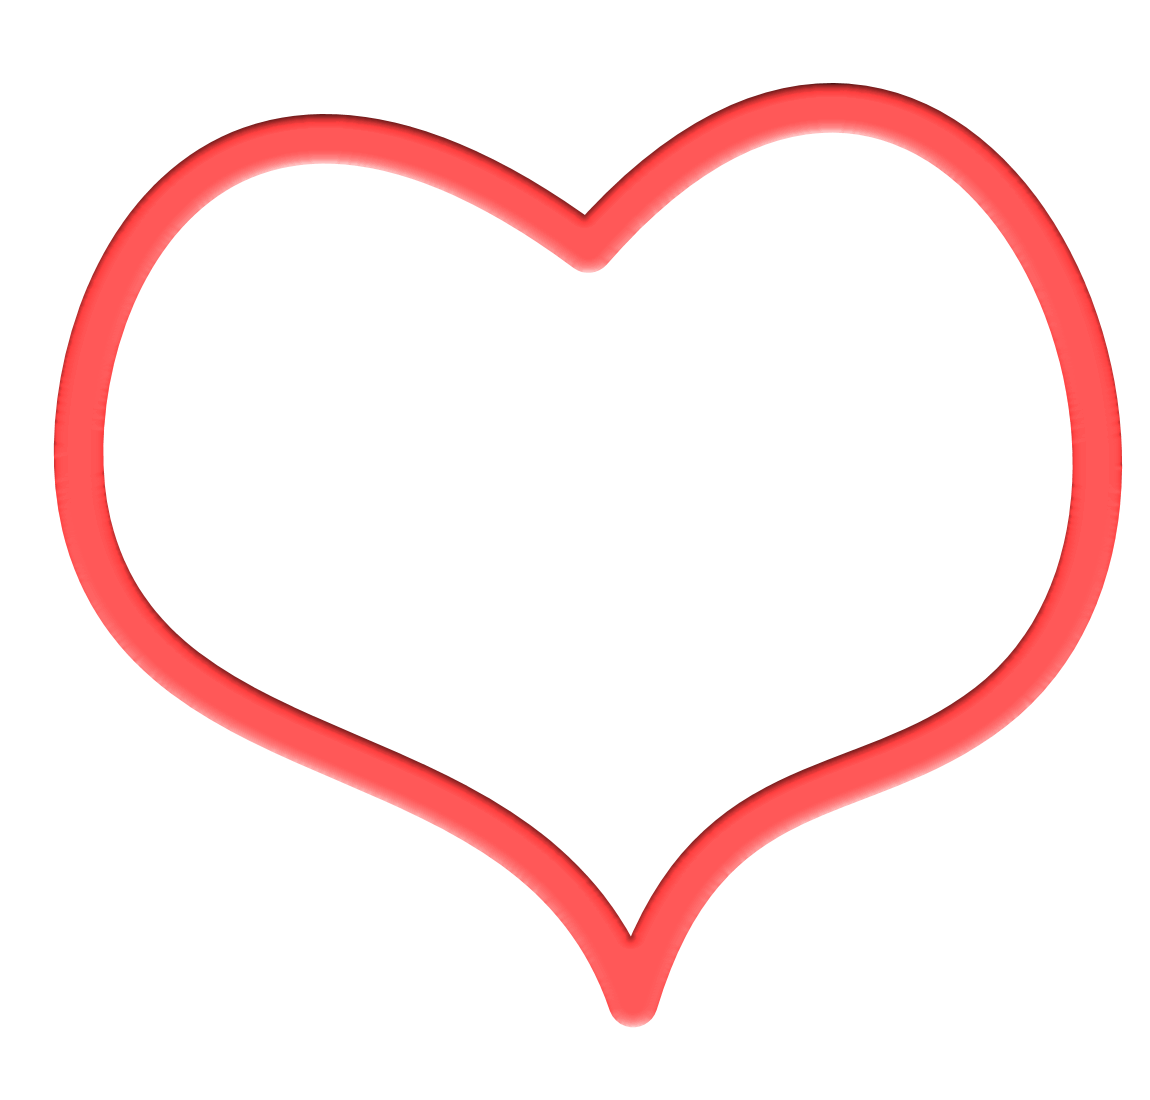 Free Images Heart - ClipArt Best